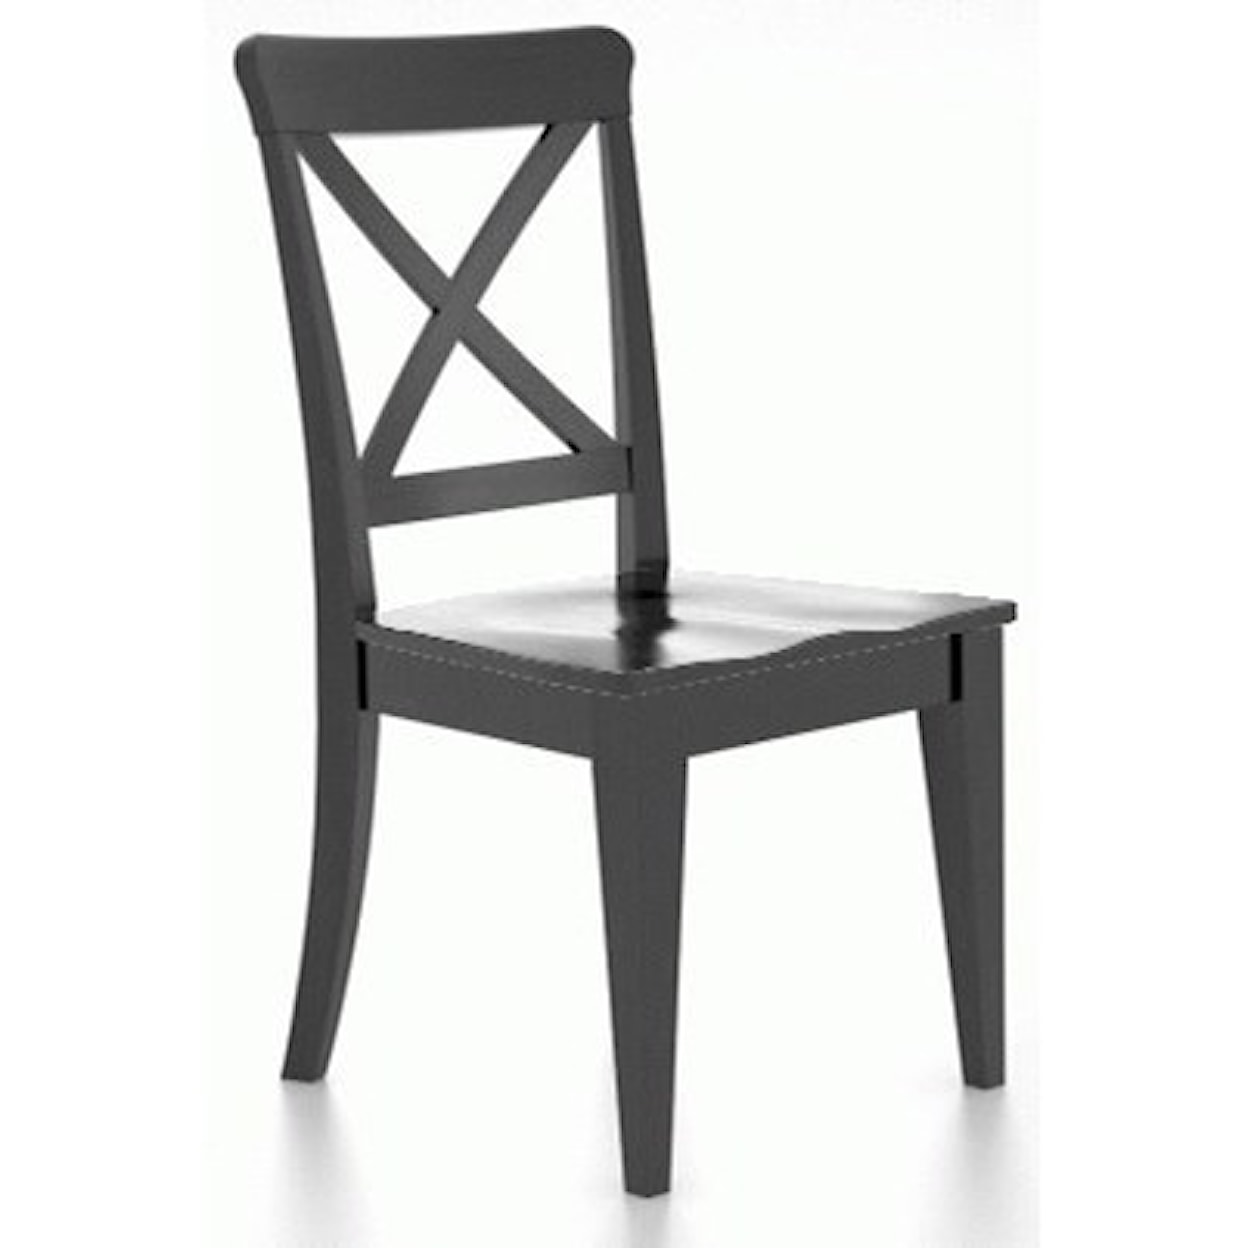 Canadel Gourmet. Customizable Side Chair